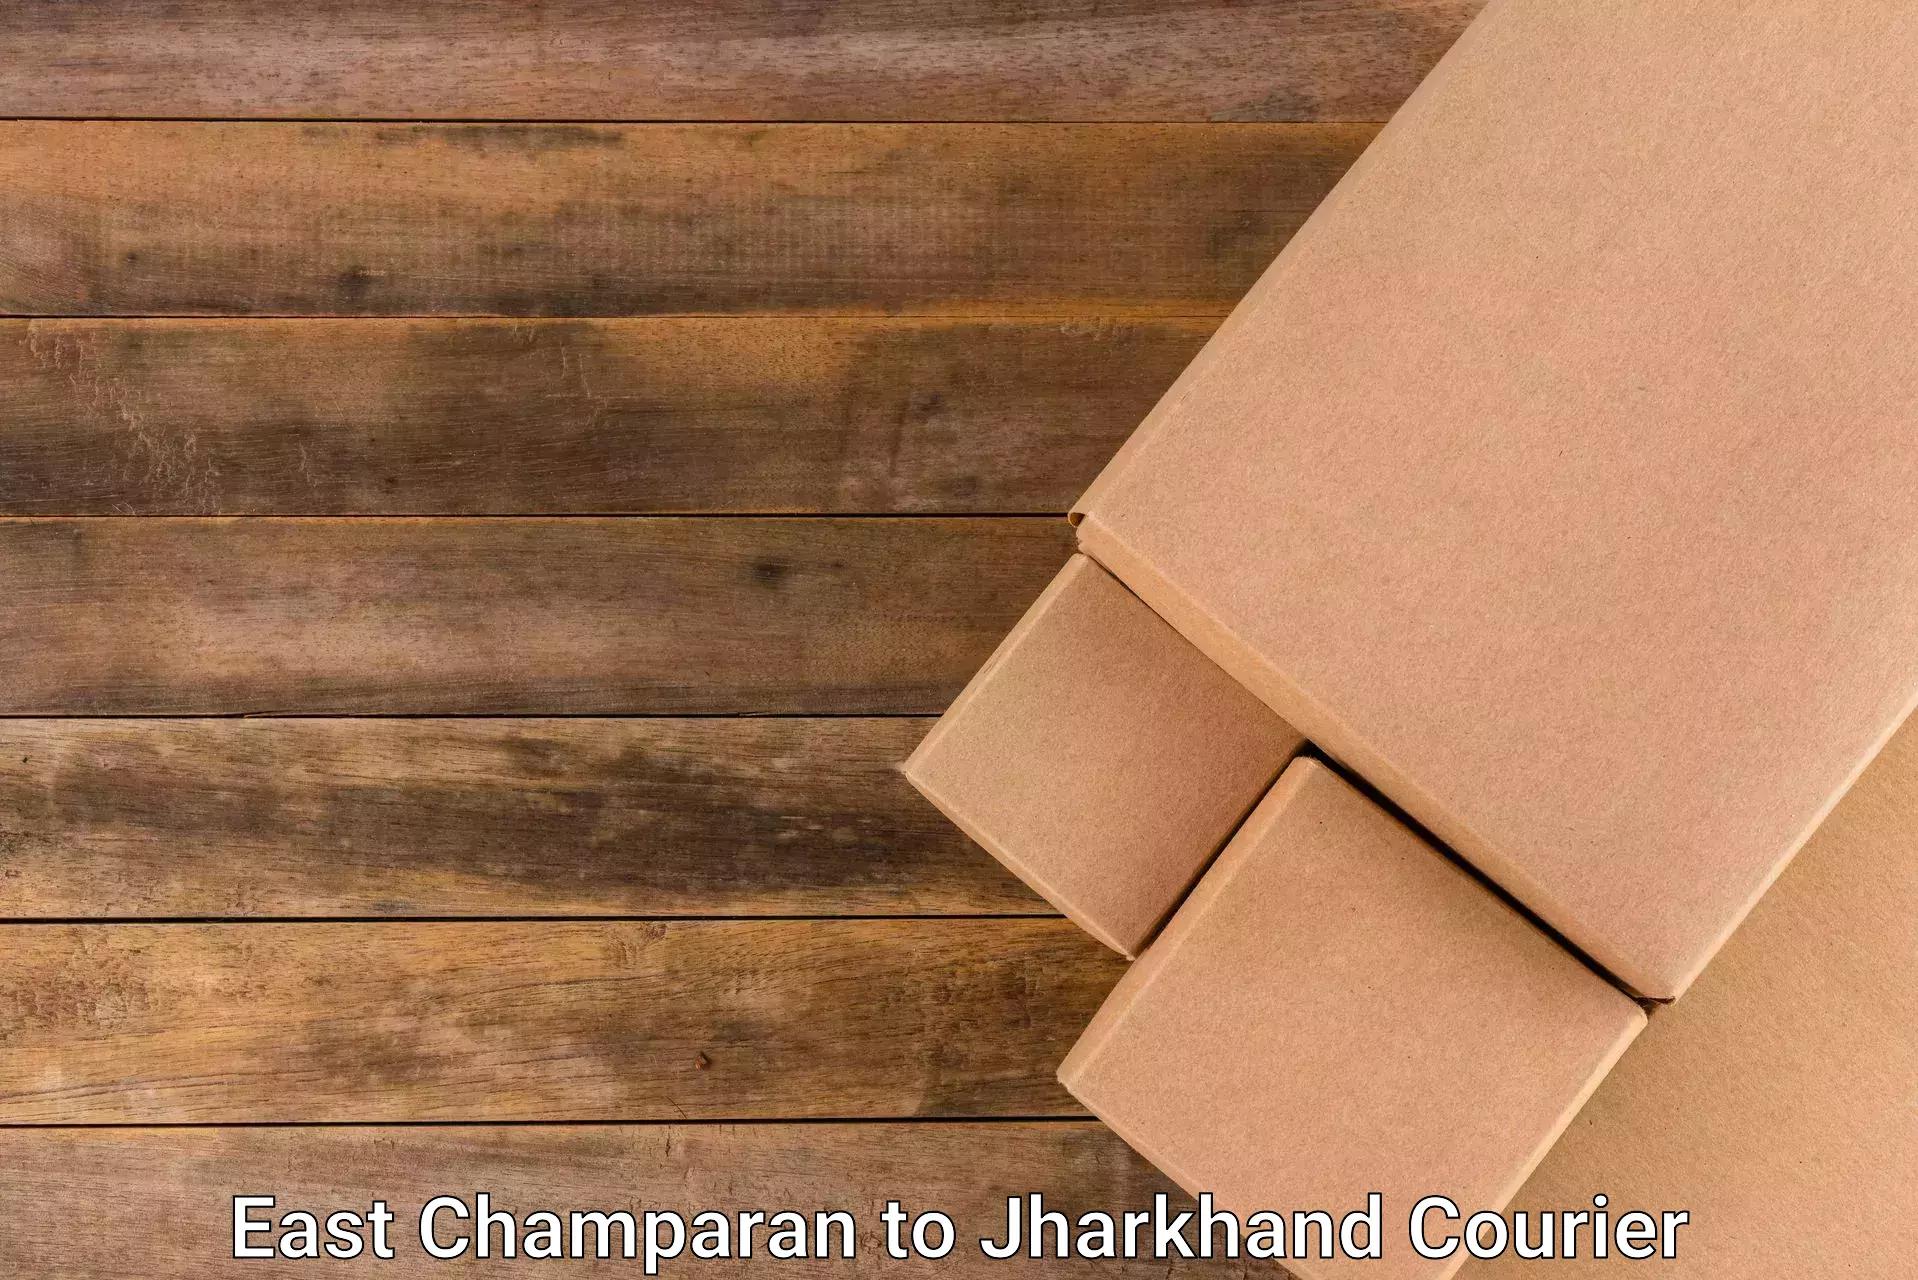 Affordable logistics services East Champaran to East Singhbhum